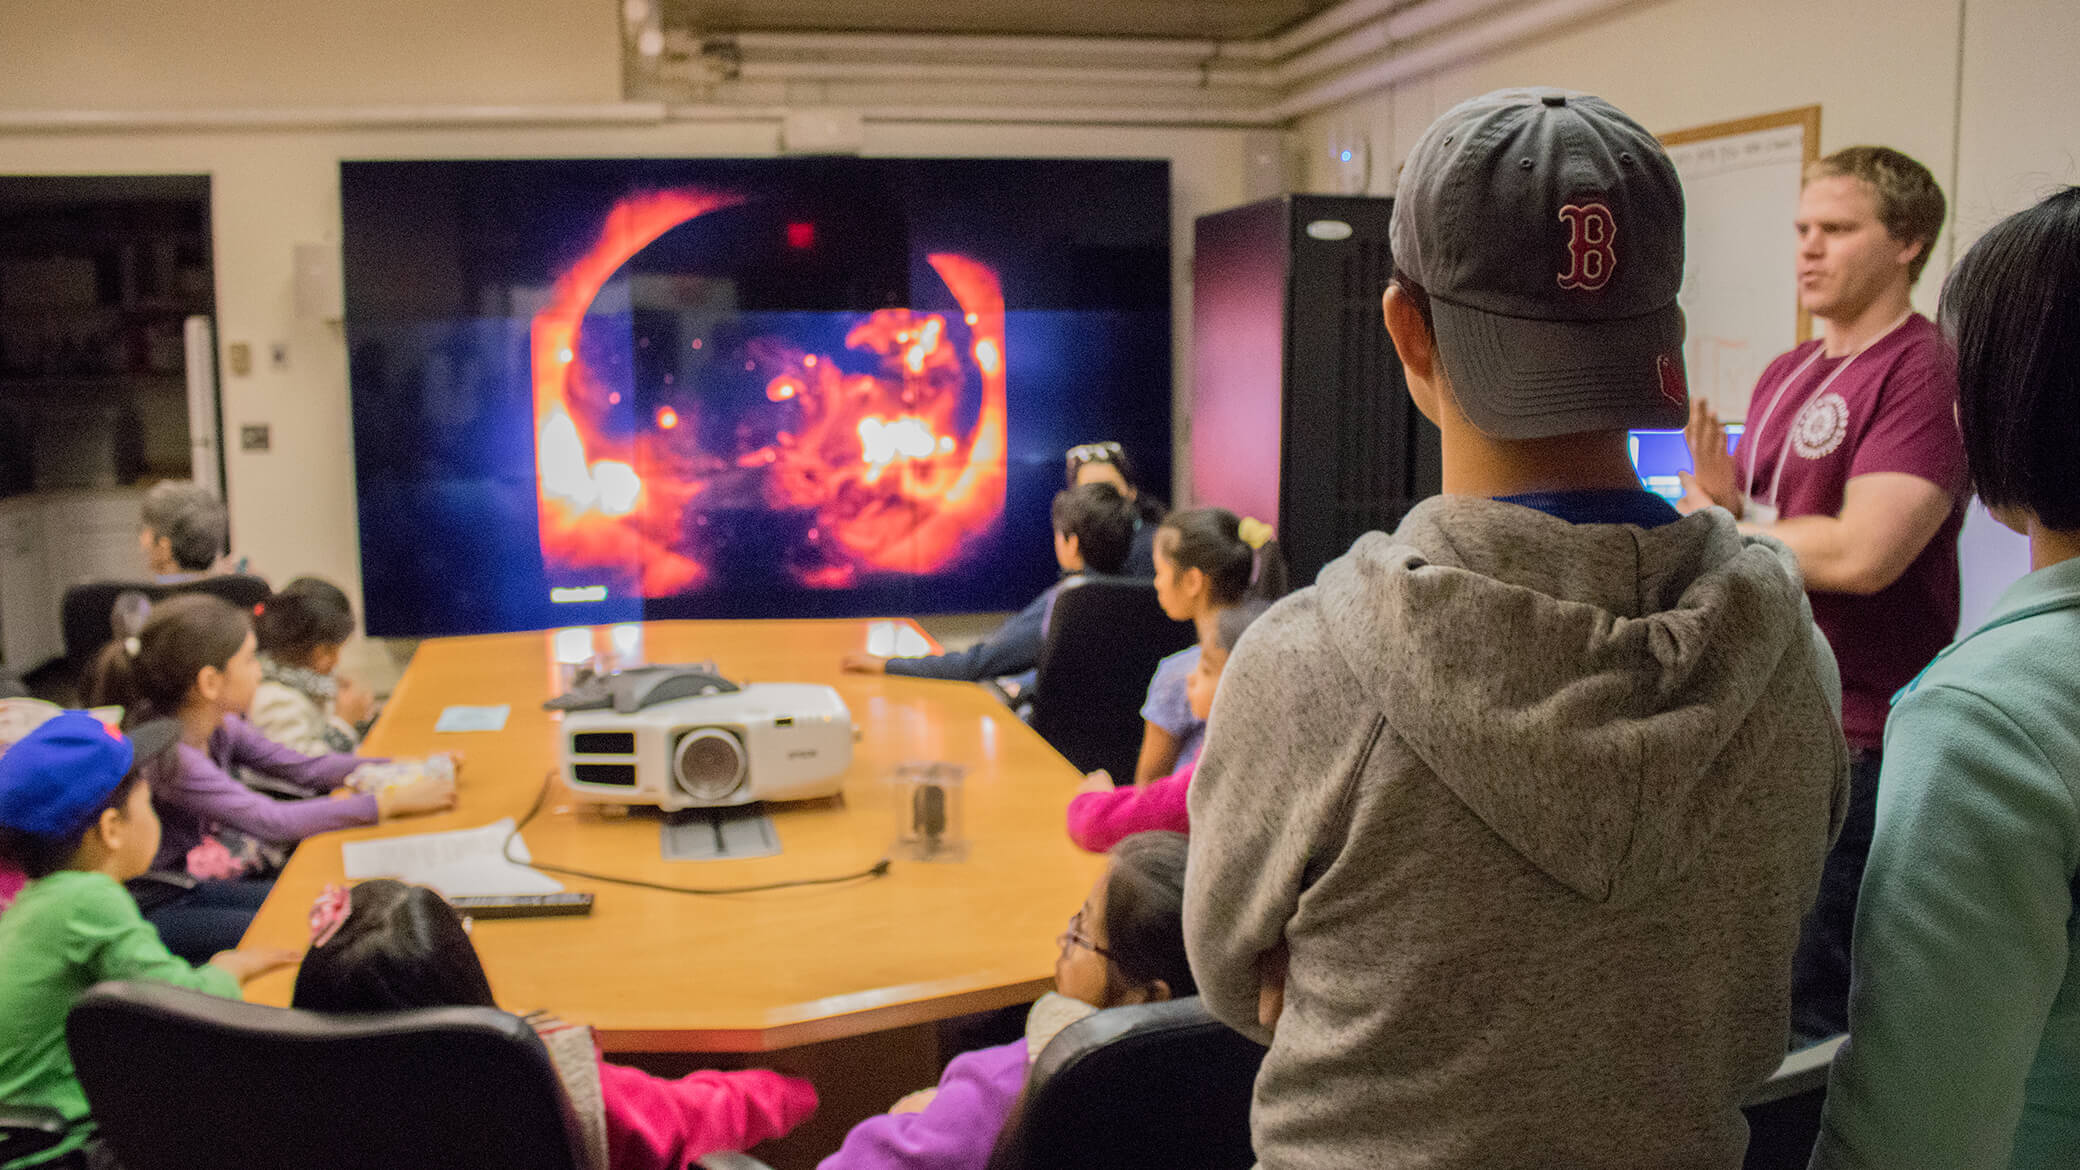 Members of the public attend Cambridge Explores the Universe 2018 at the Center for Astrophysics | Harvard & Smithsonian.